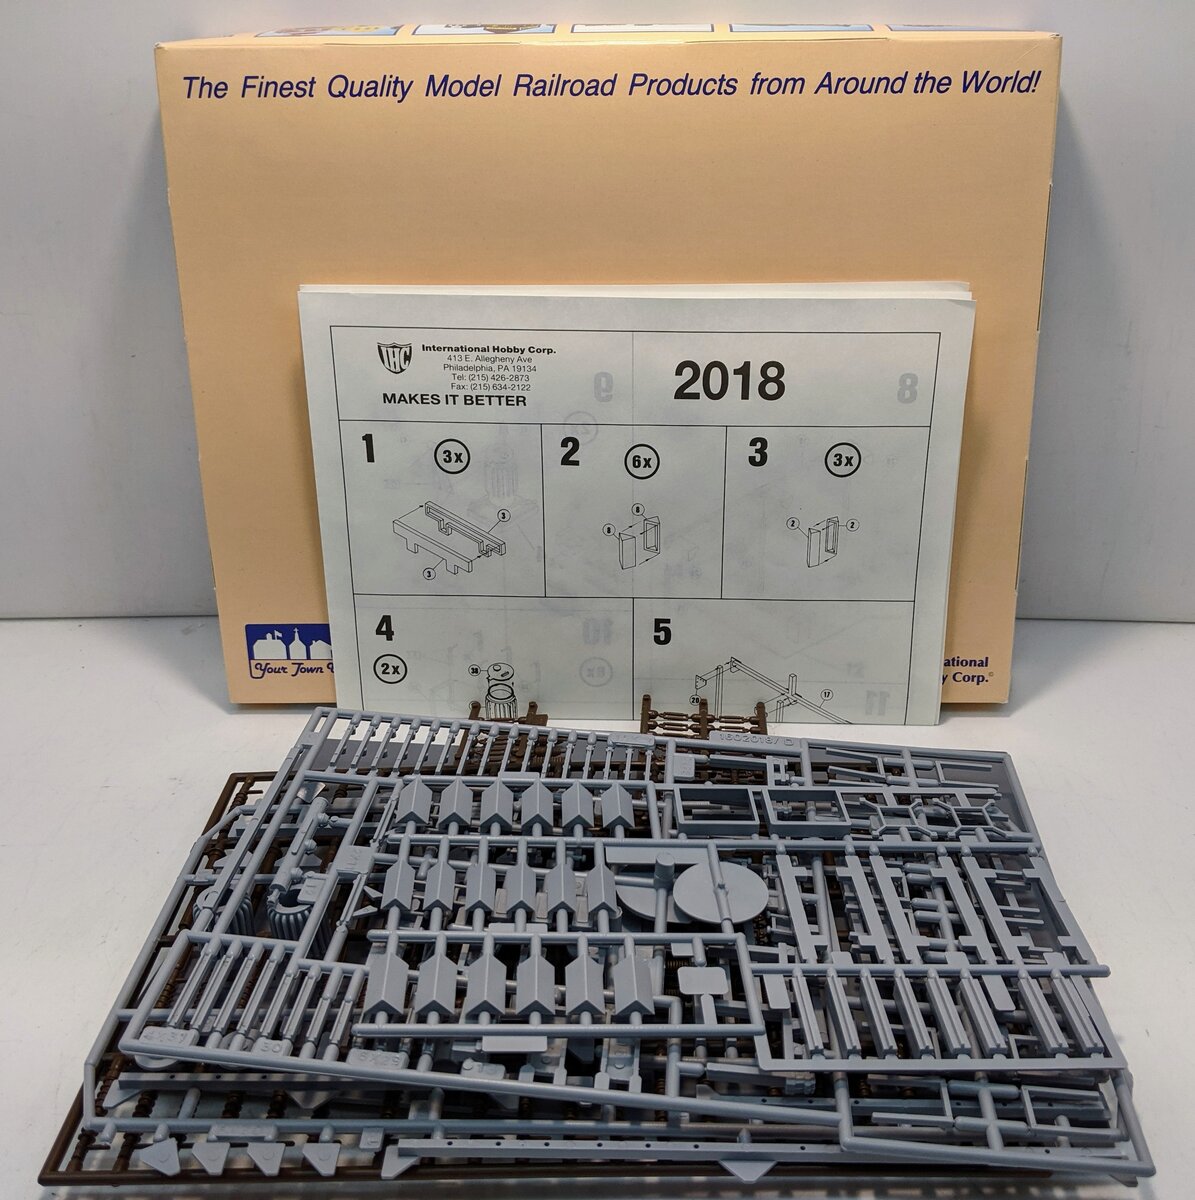 IHC 2018 HO Scale Power Station Building Kit